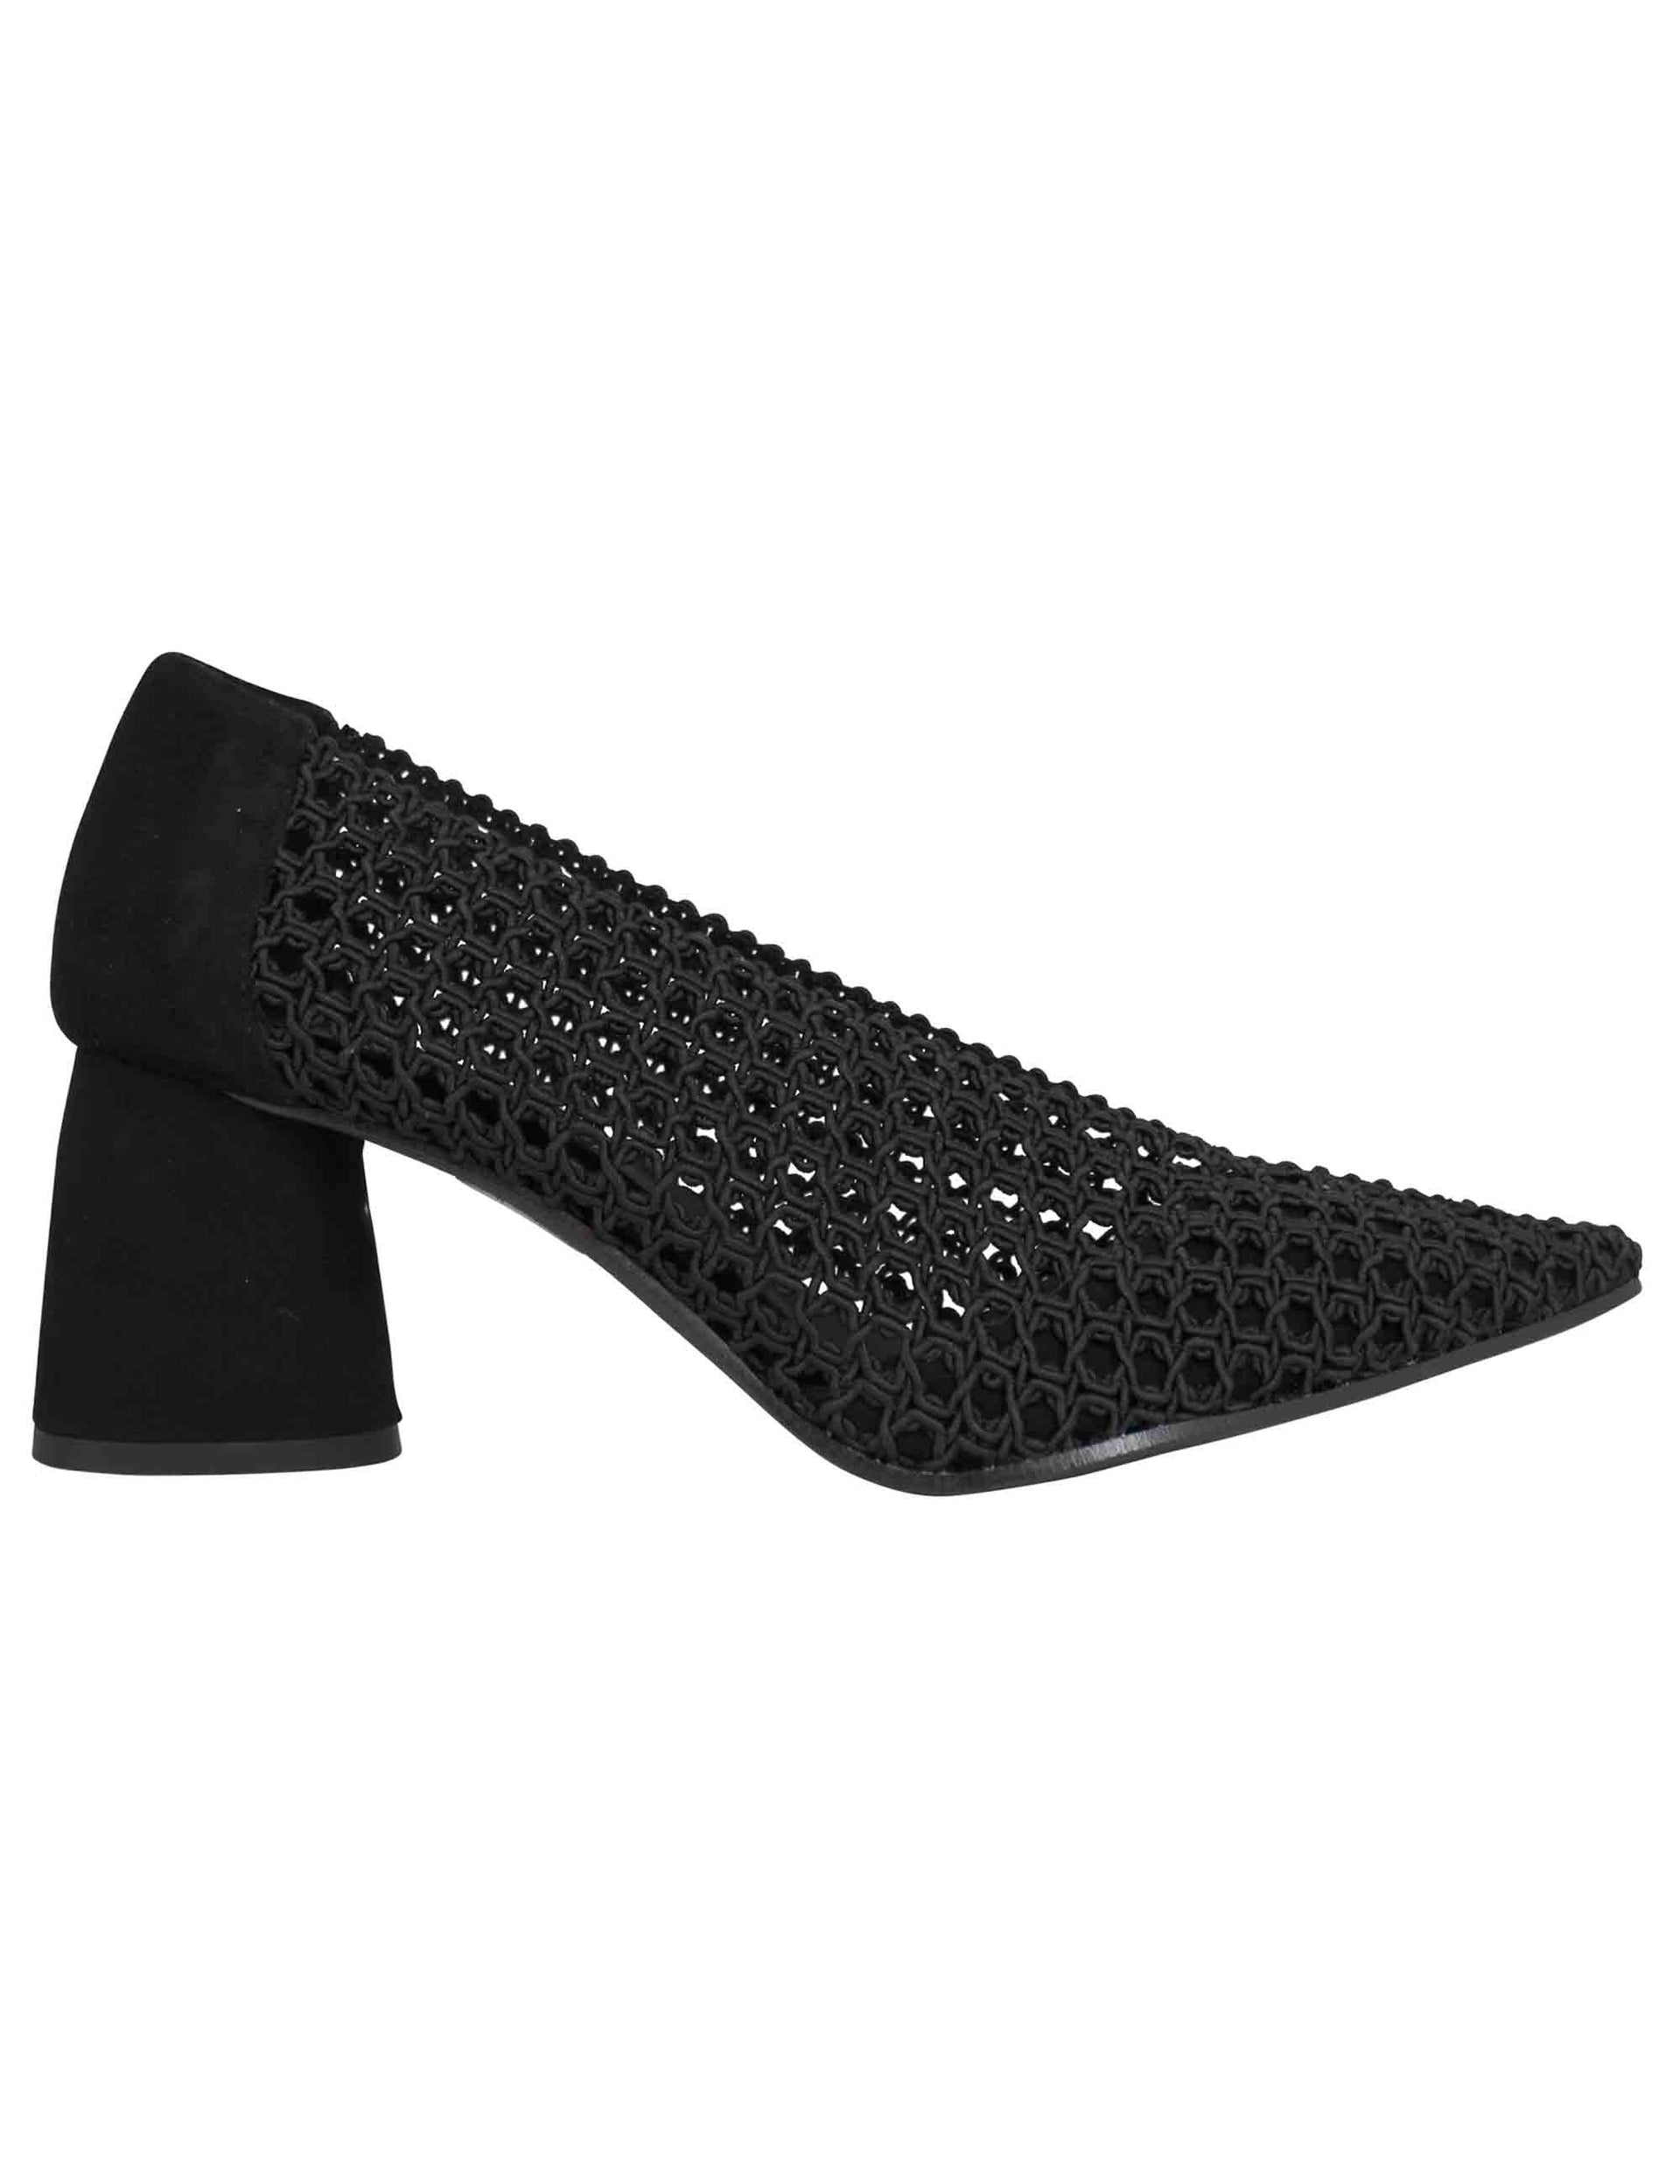 Women's pumps in black stretch fabric with suede heel